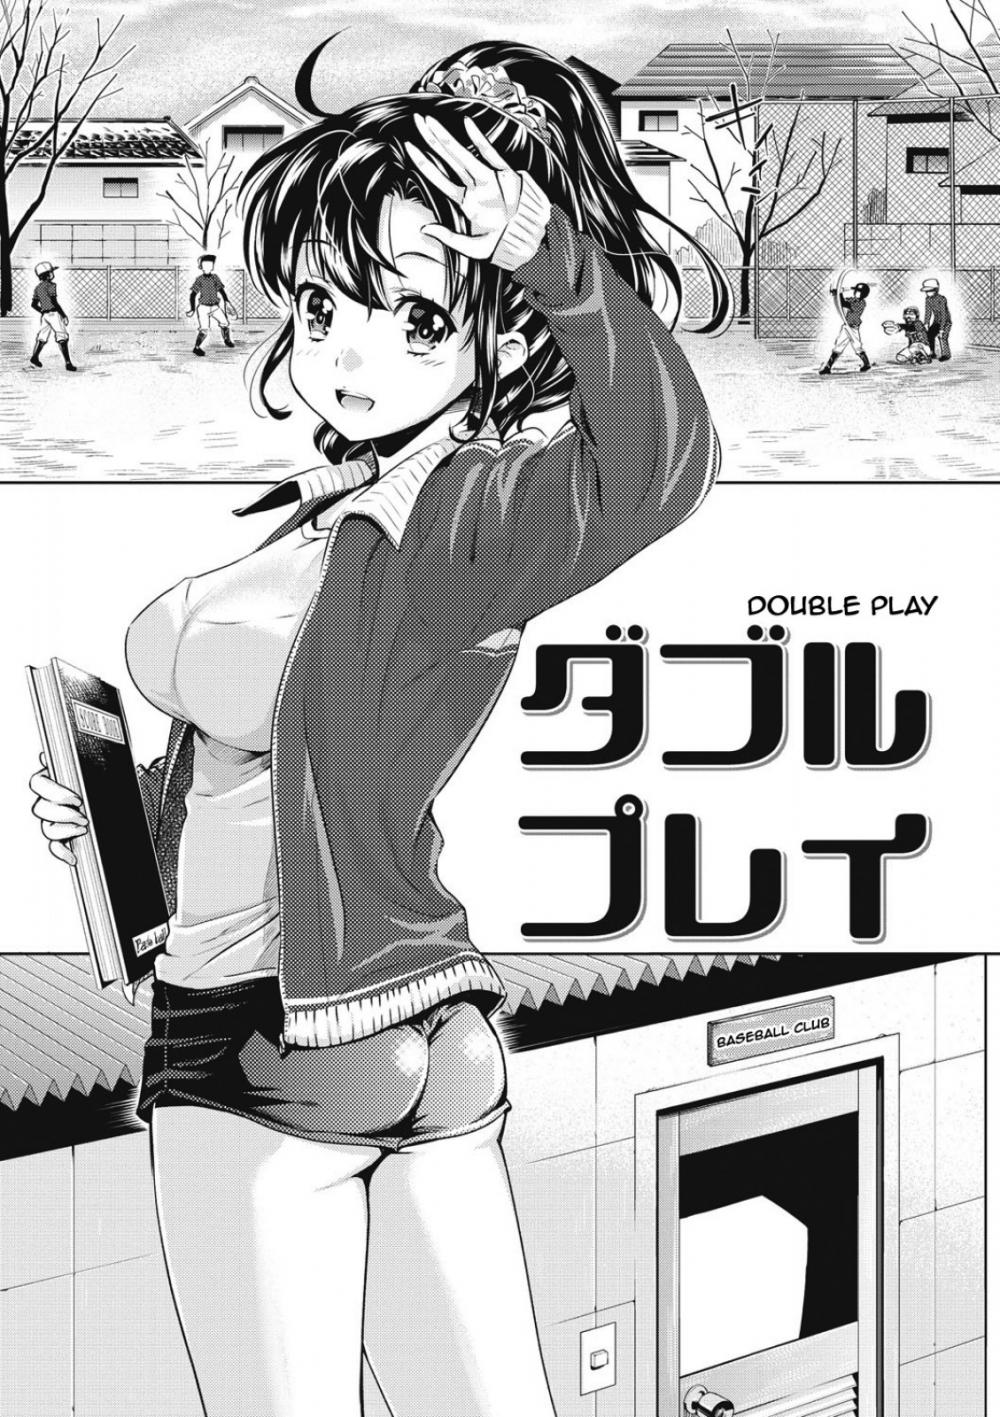 Hentai Manga Comic-From Now On She'll Be Doing NTR-Chapter 5-1